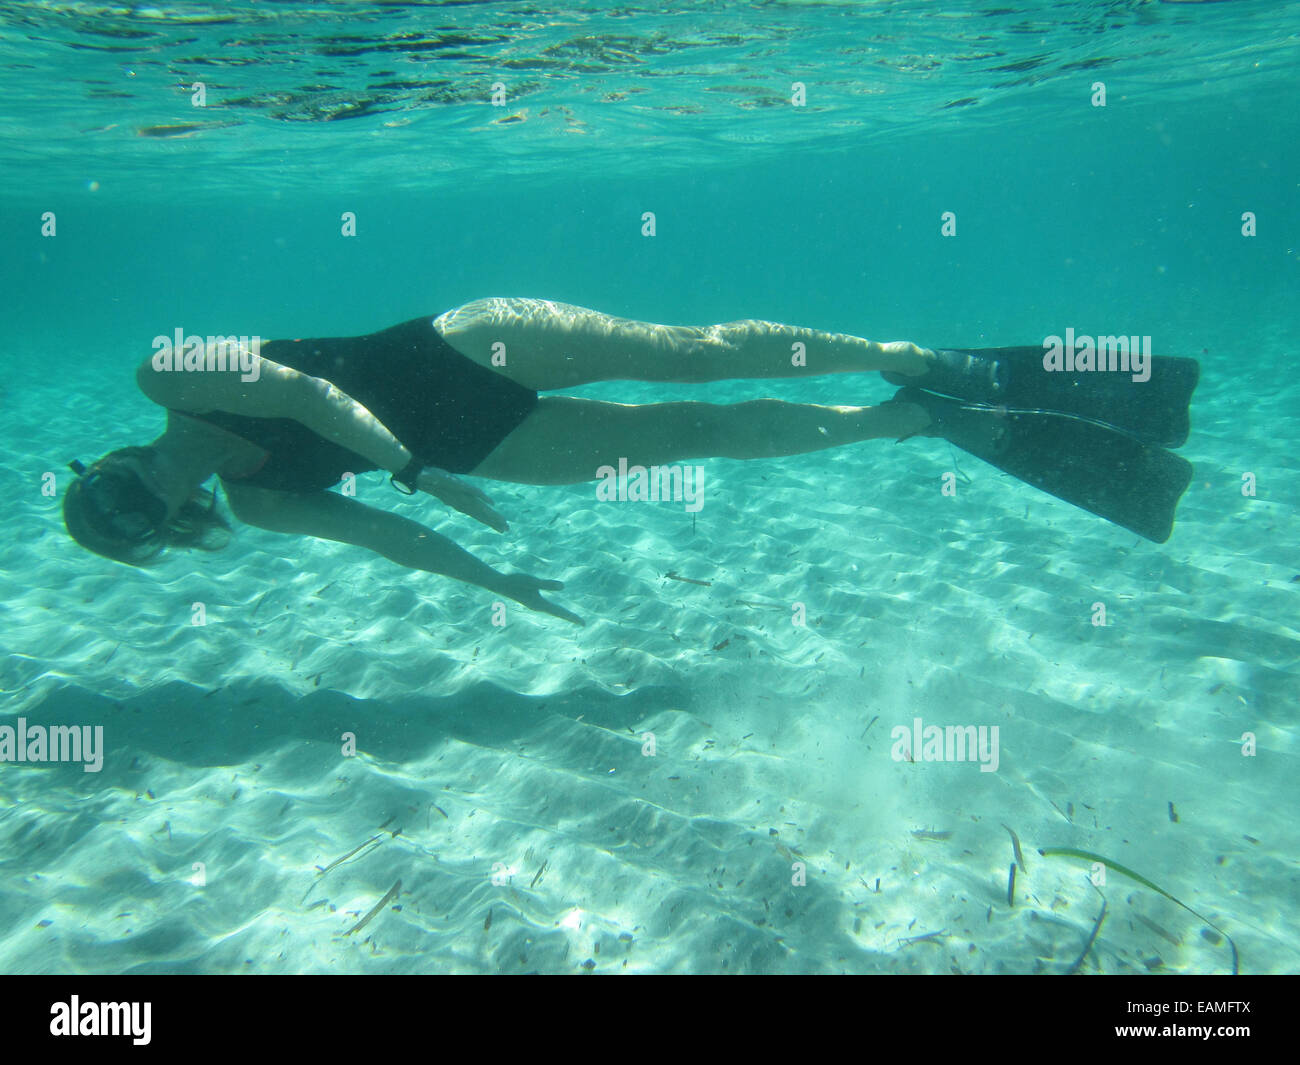 Female swimmer wearing mask and fins diving calmly underwater in ocean over sandy bottom Stock Photo